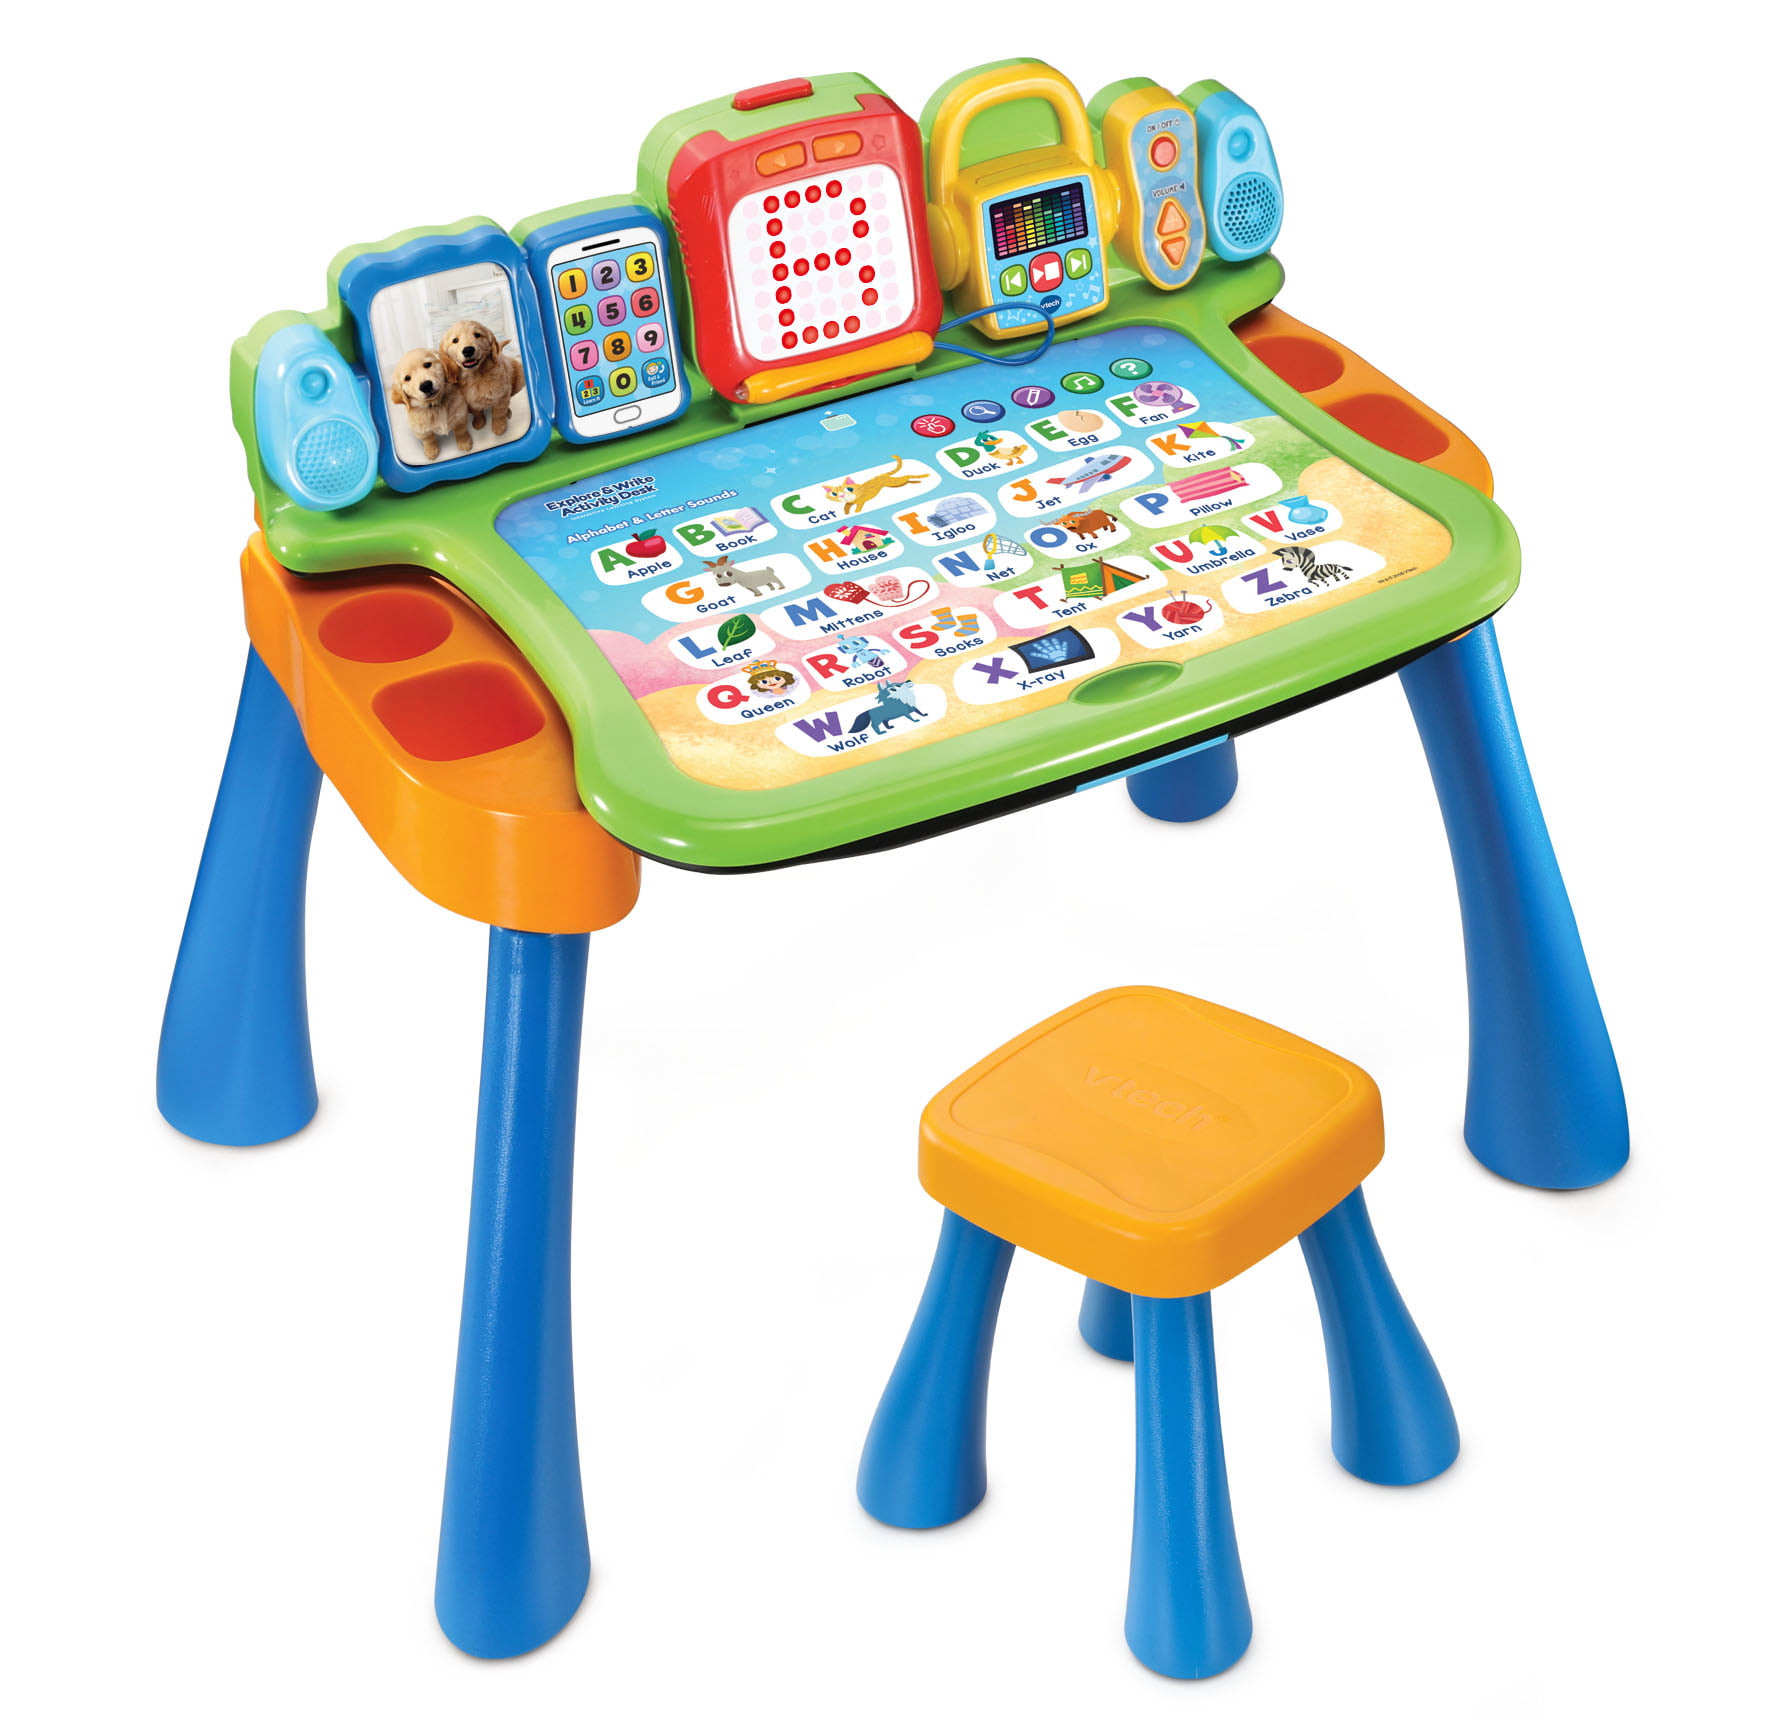 NEW Pink VTech Explore /& Write Activity Desk to Easel Chalkboard Table